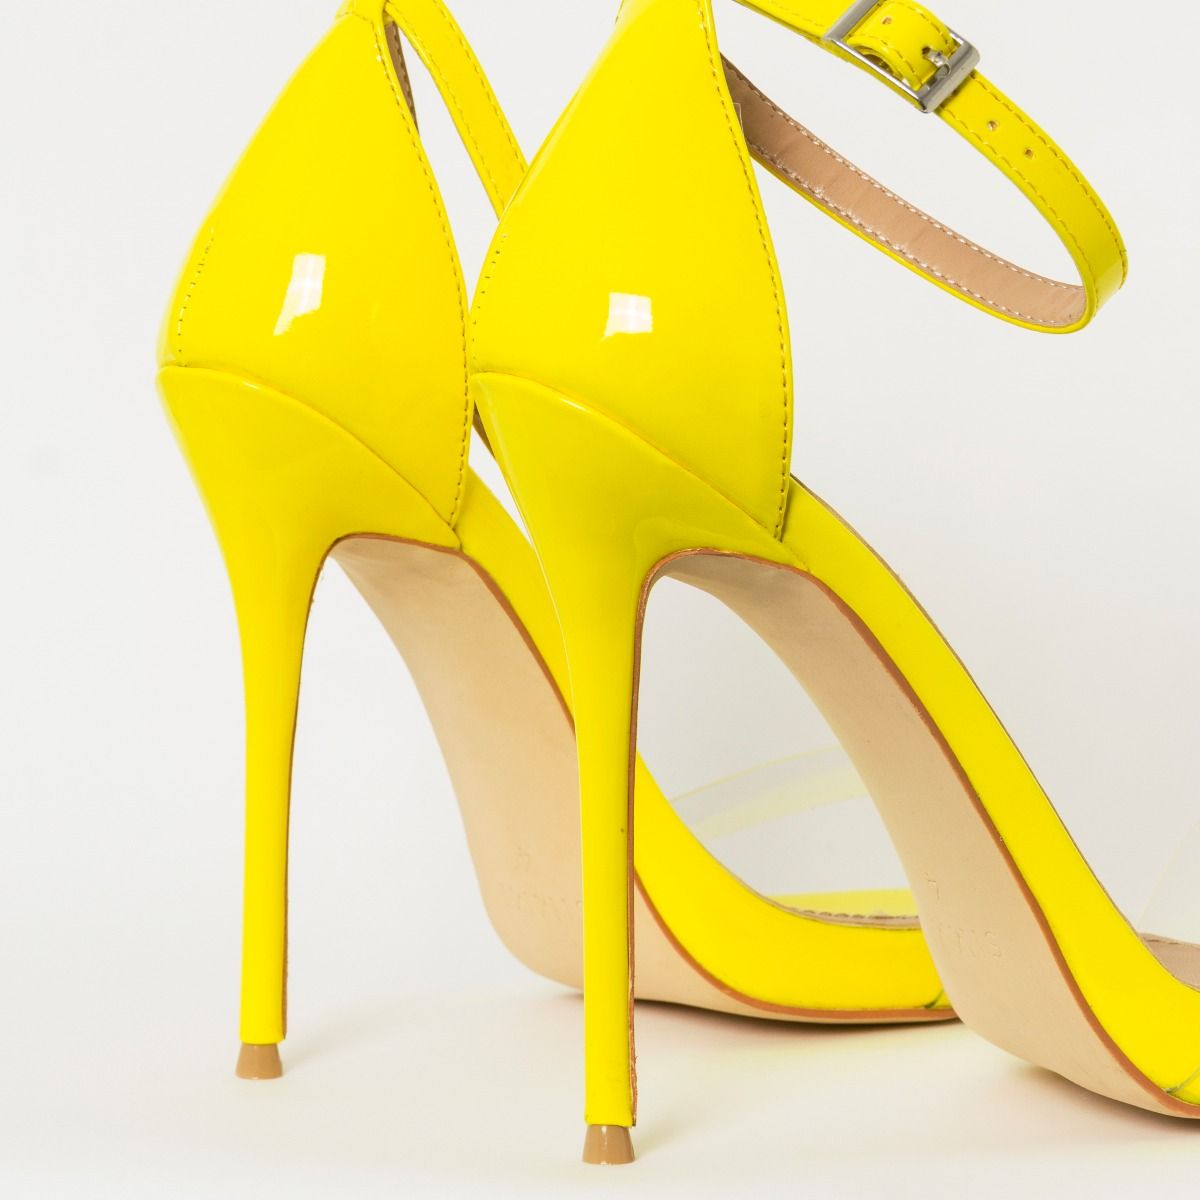 Elsie Neon Yellow Patent Barely There Stiletto Heels